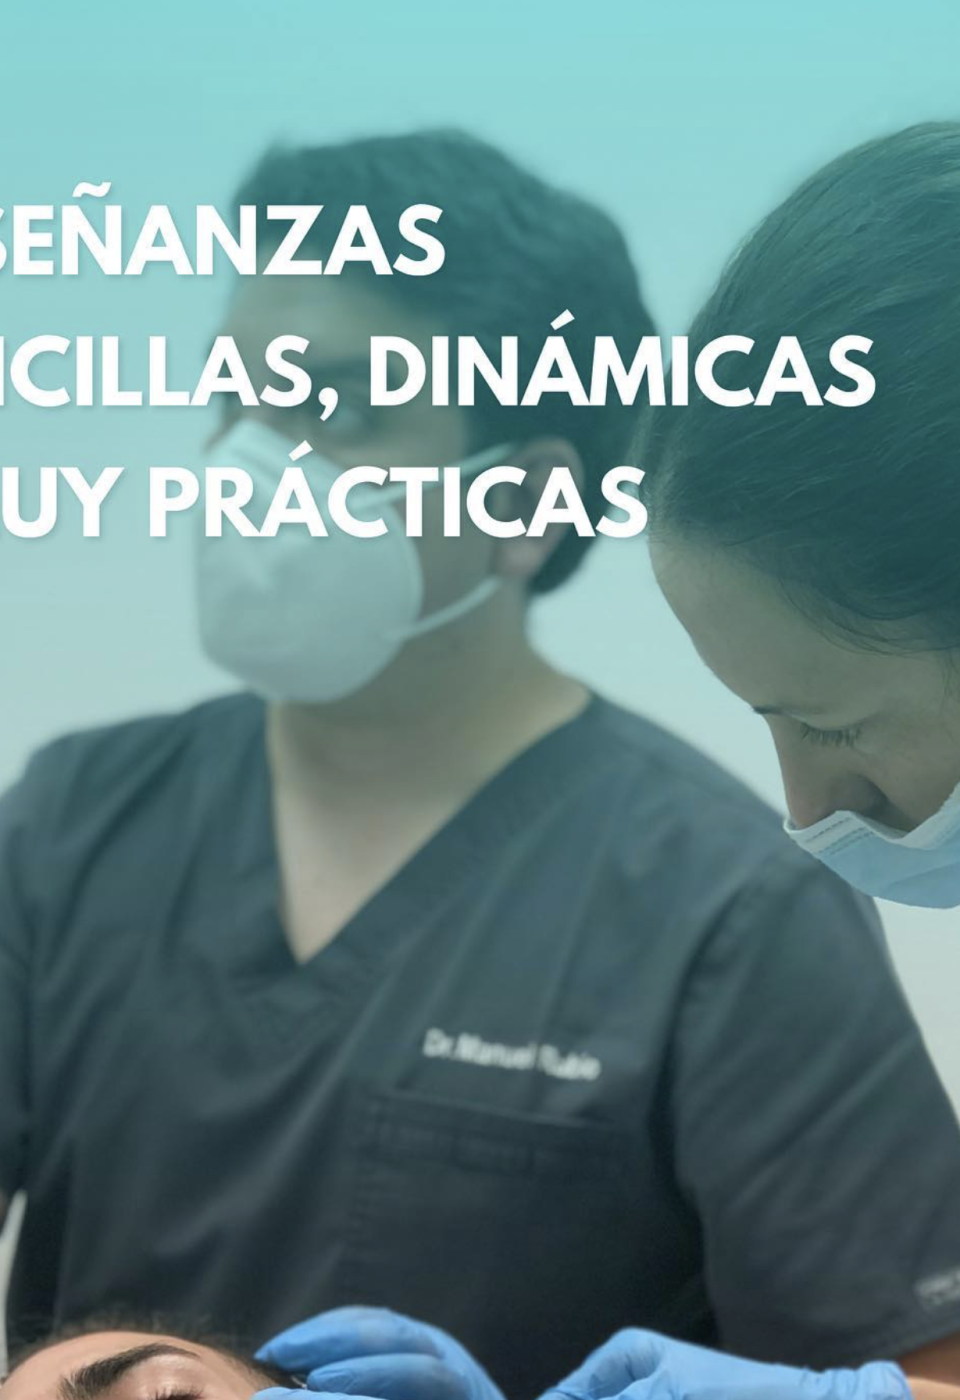 Discover Excellence in Aesthetic Medical Training with CIME Academy